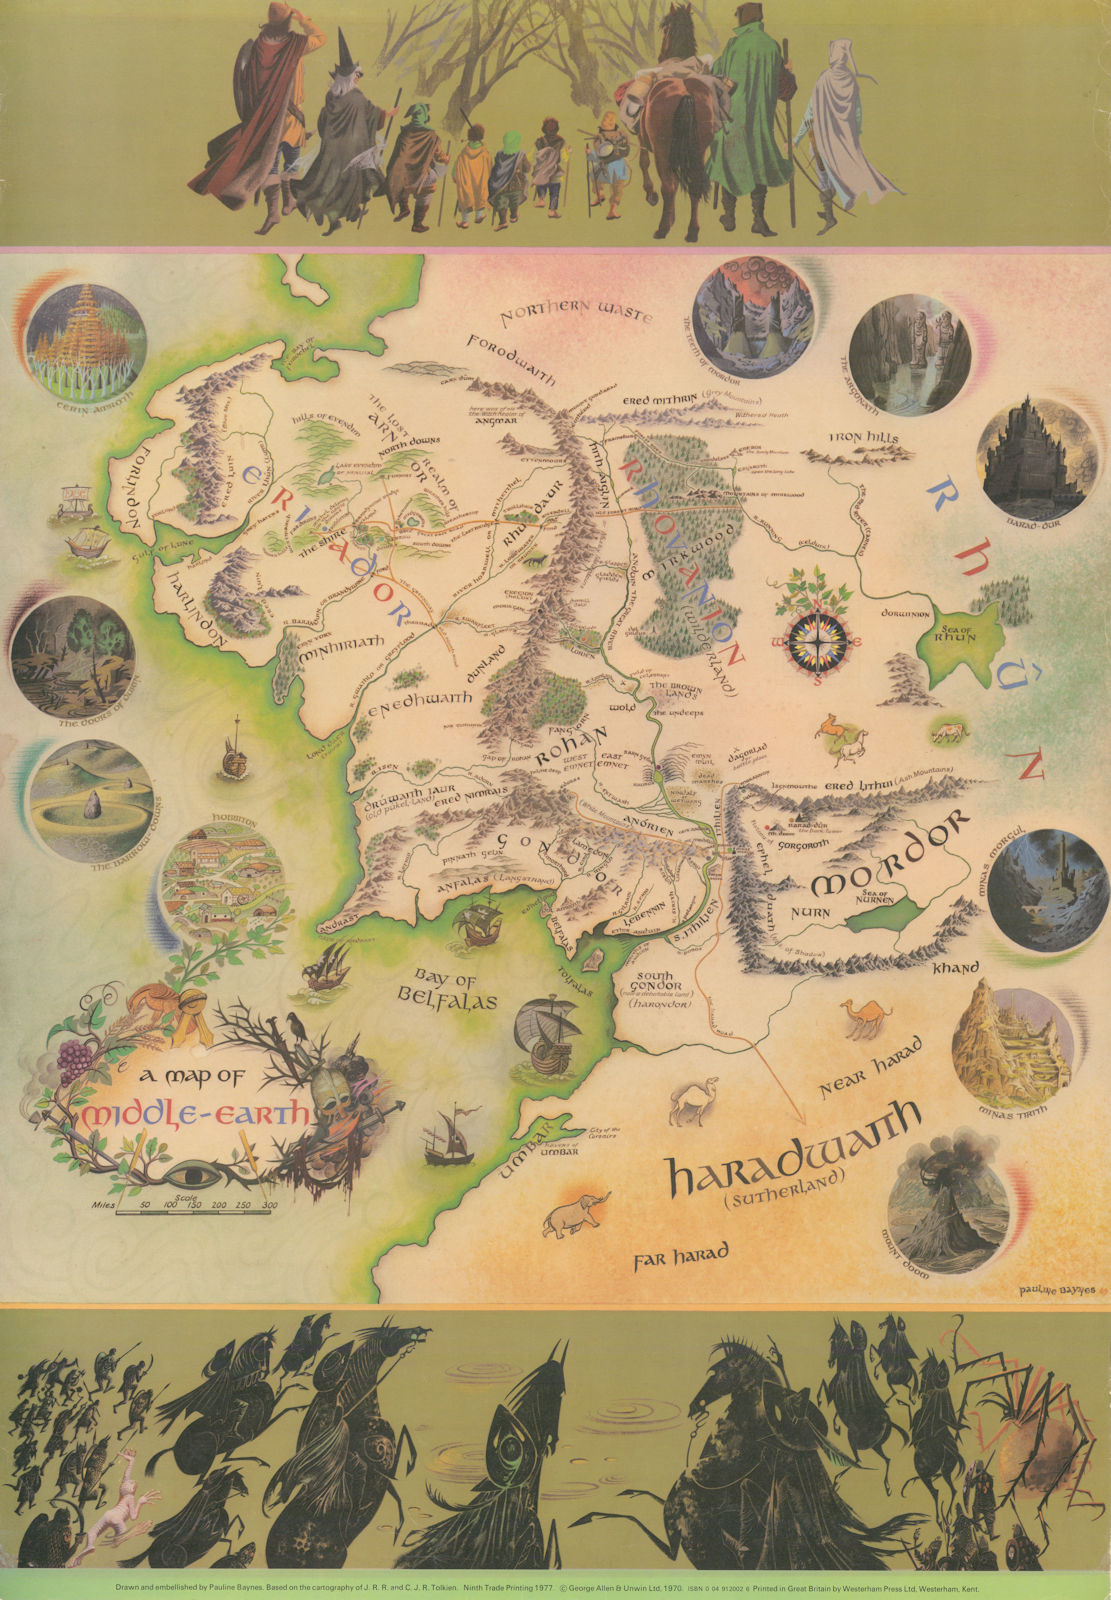 A map of Middle-earth by Pauline Baynes, JRR & CJR Tolkien. 73x50cm. 1977